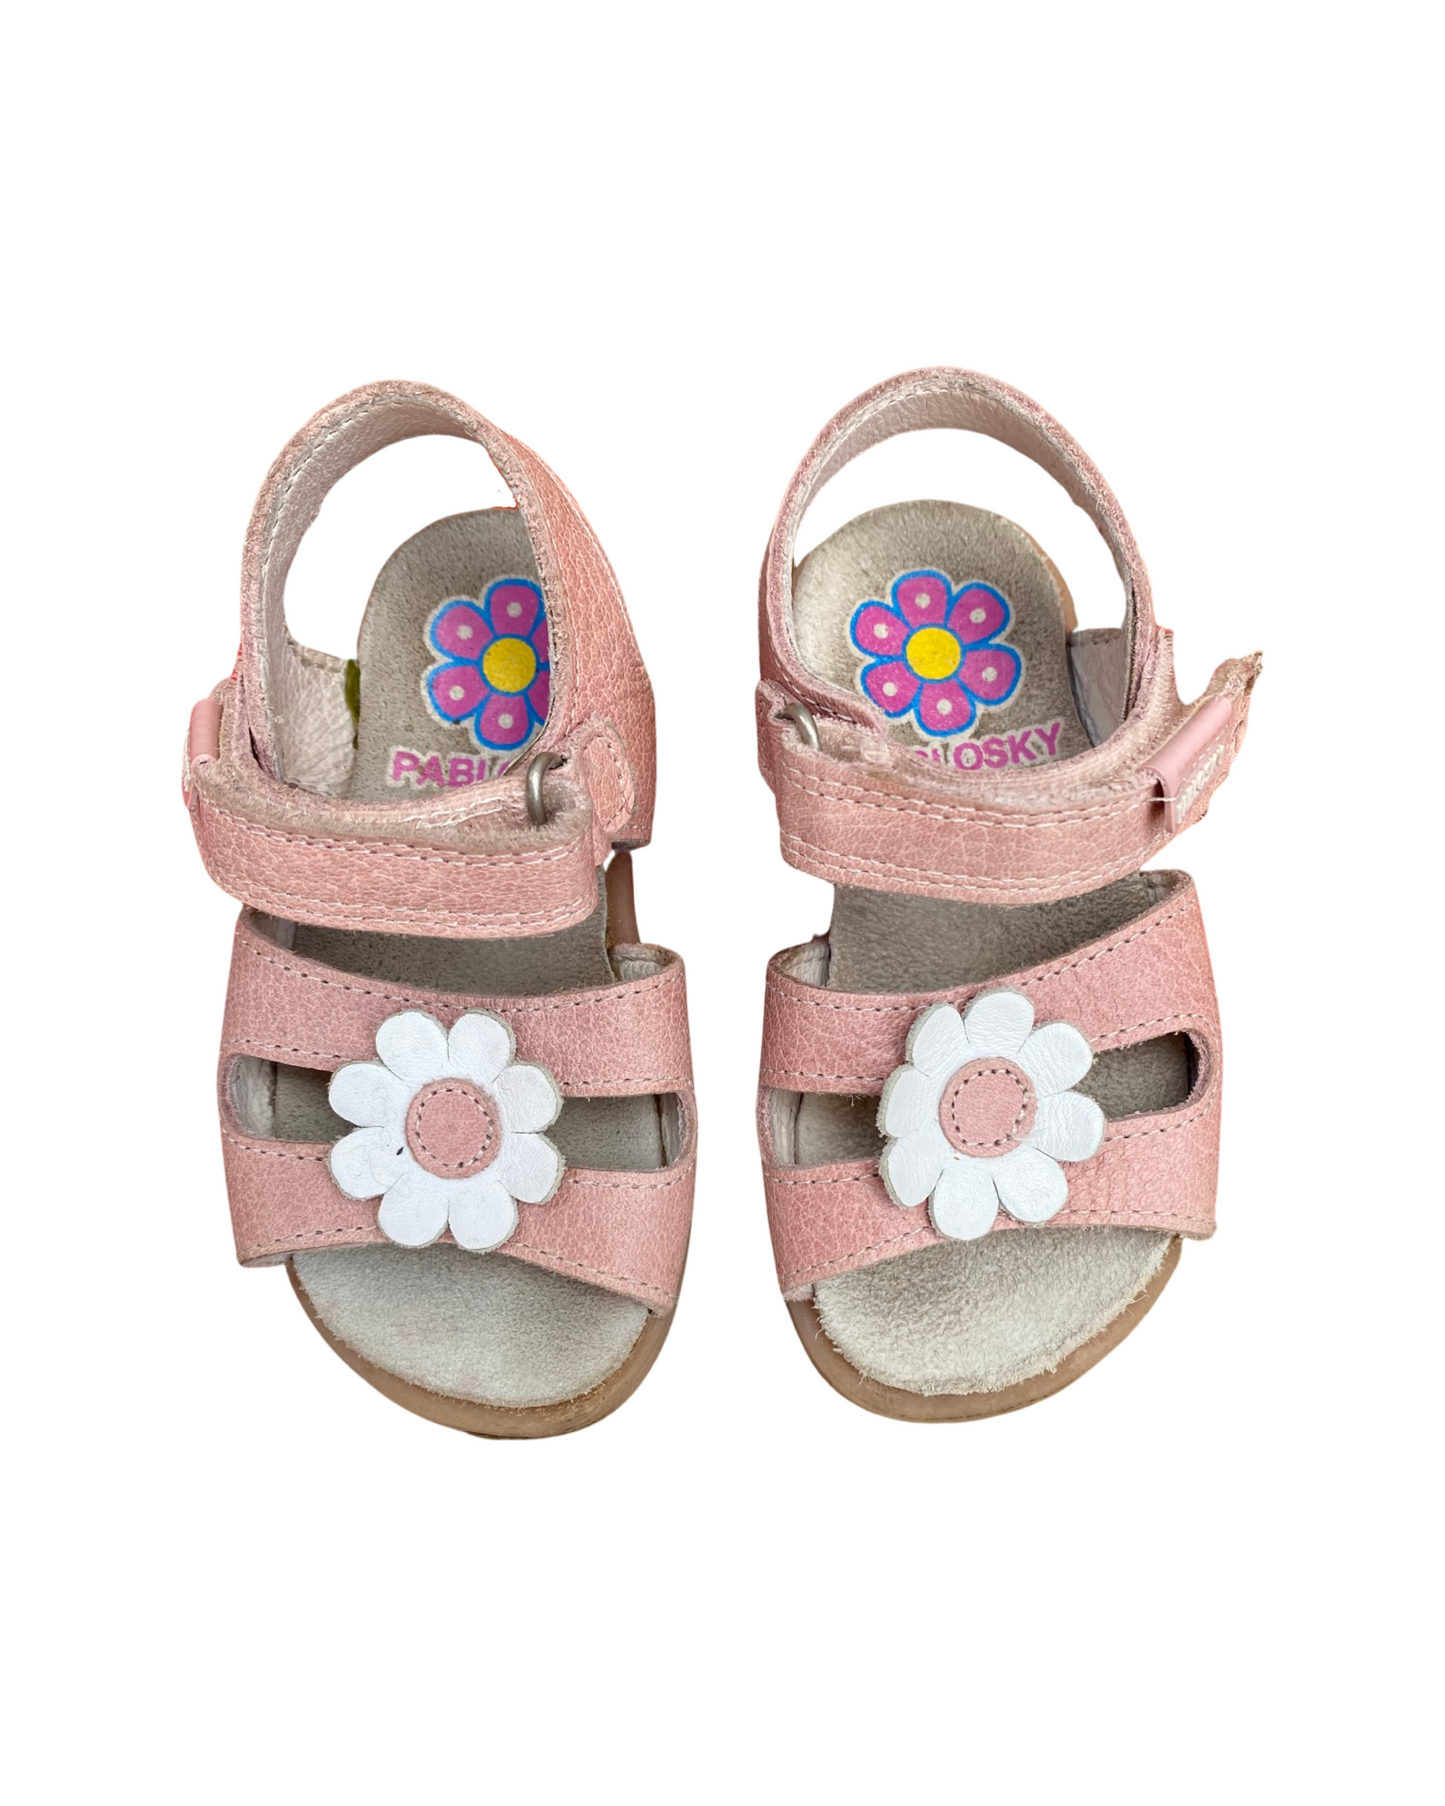 Pablosky pink leather baby sandals (size EU21/UK5)